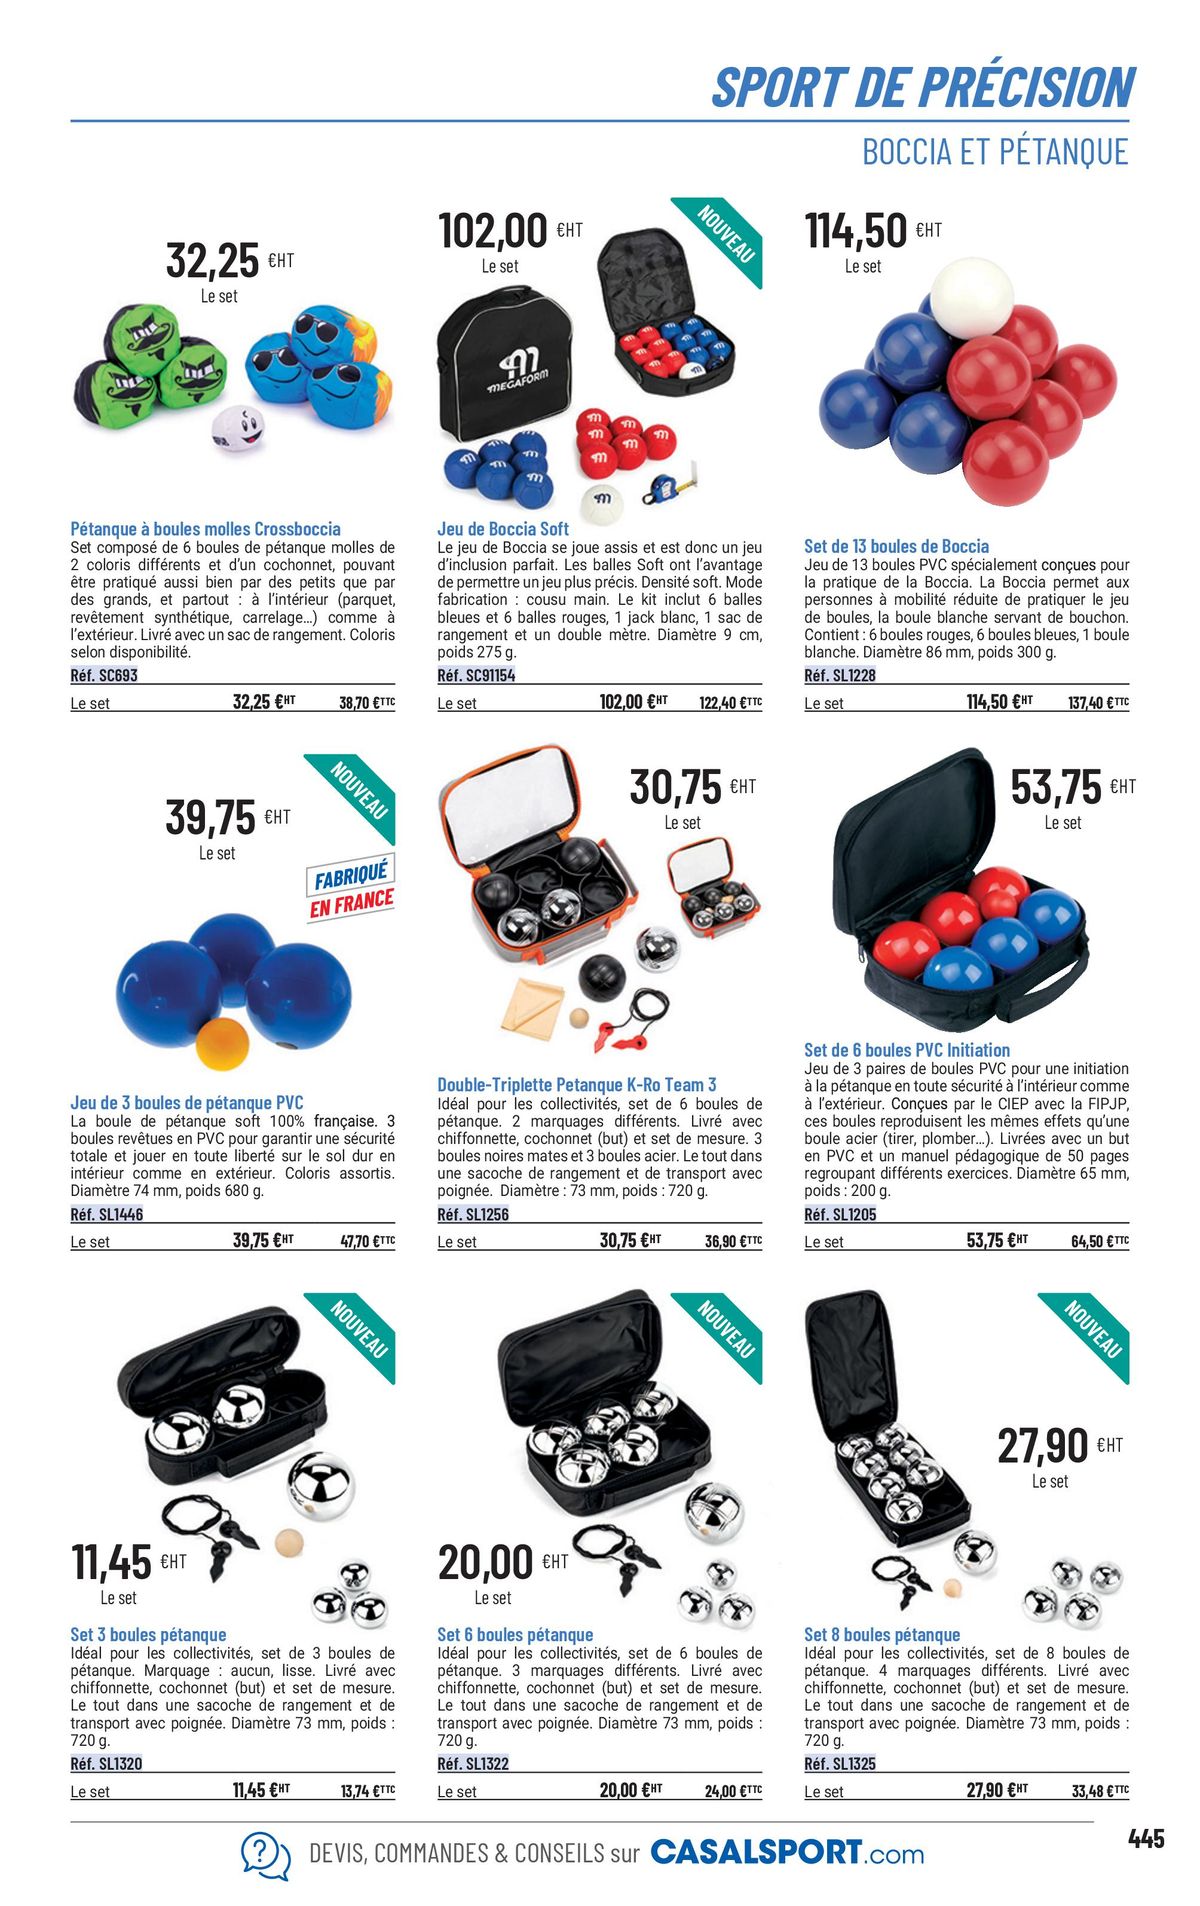 Catalogue Equipement sportif, page 00417